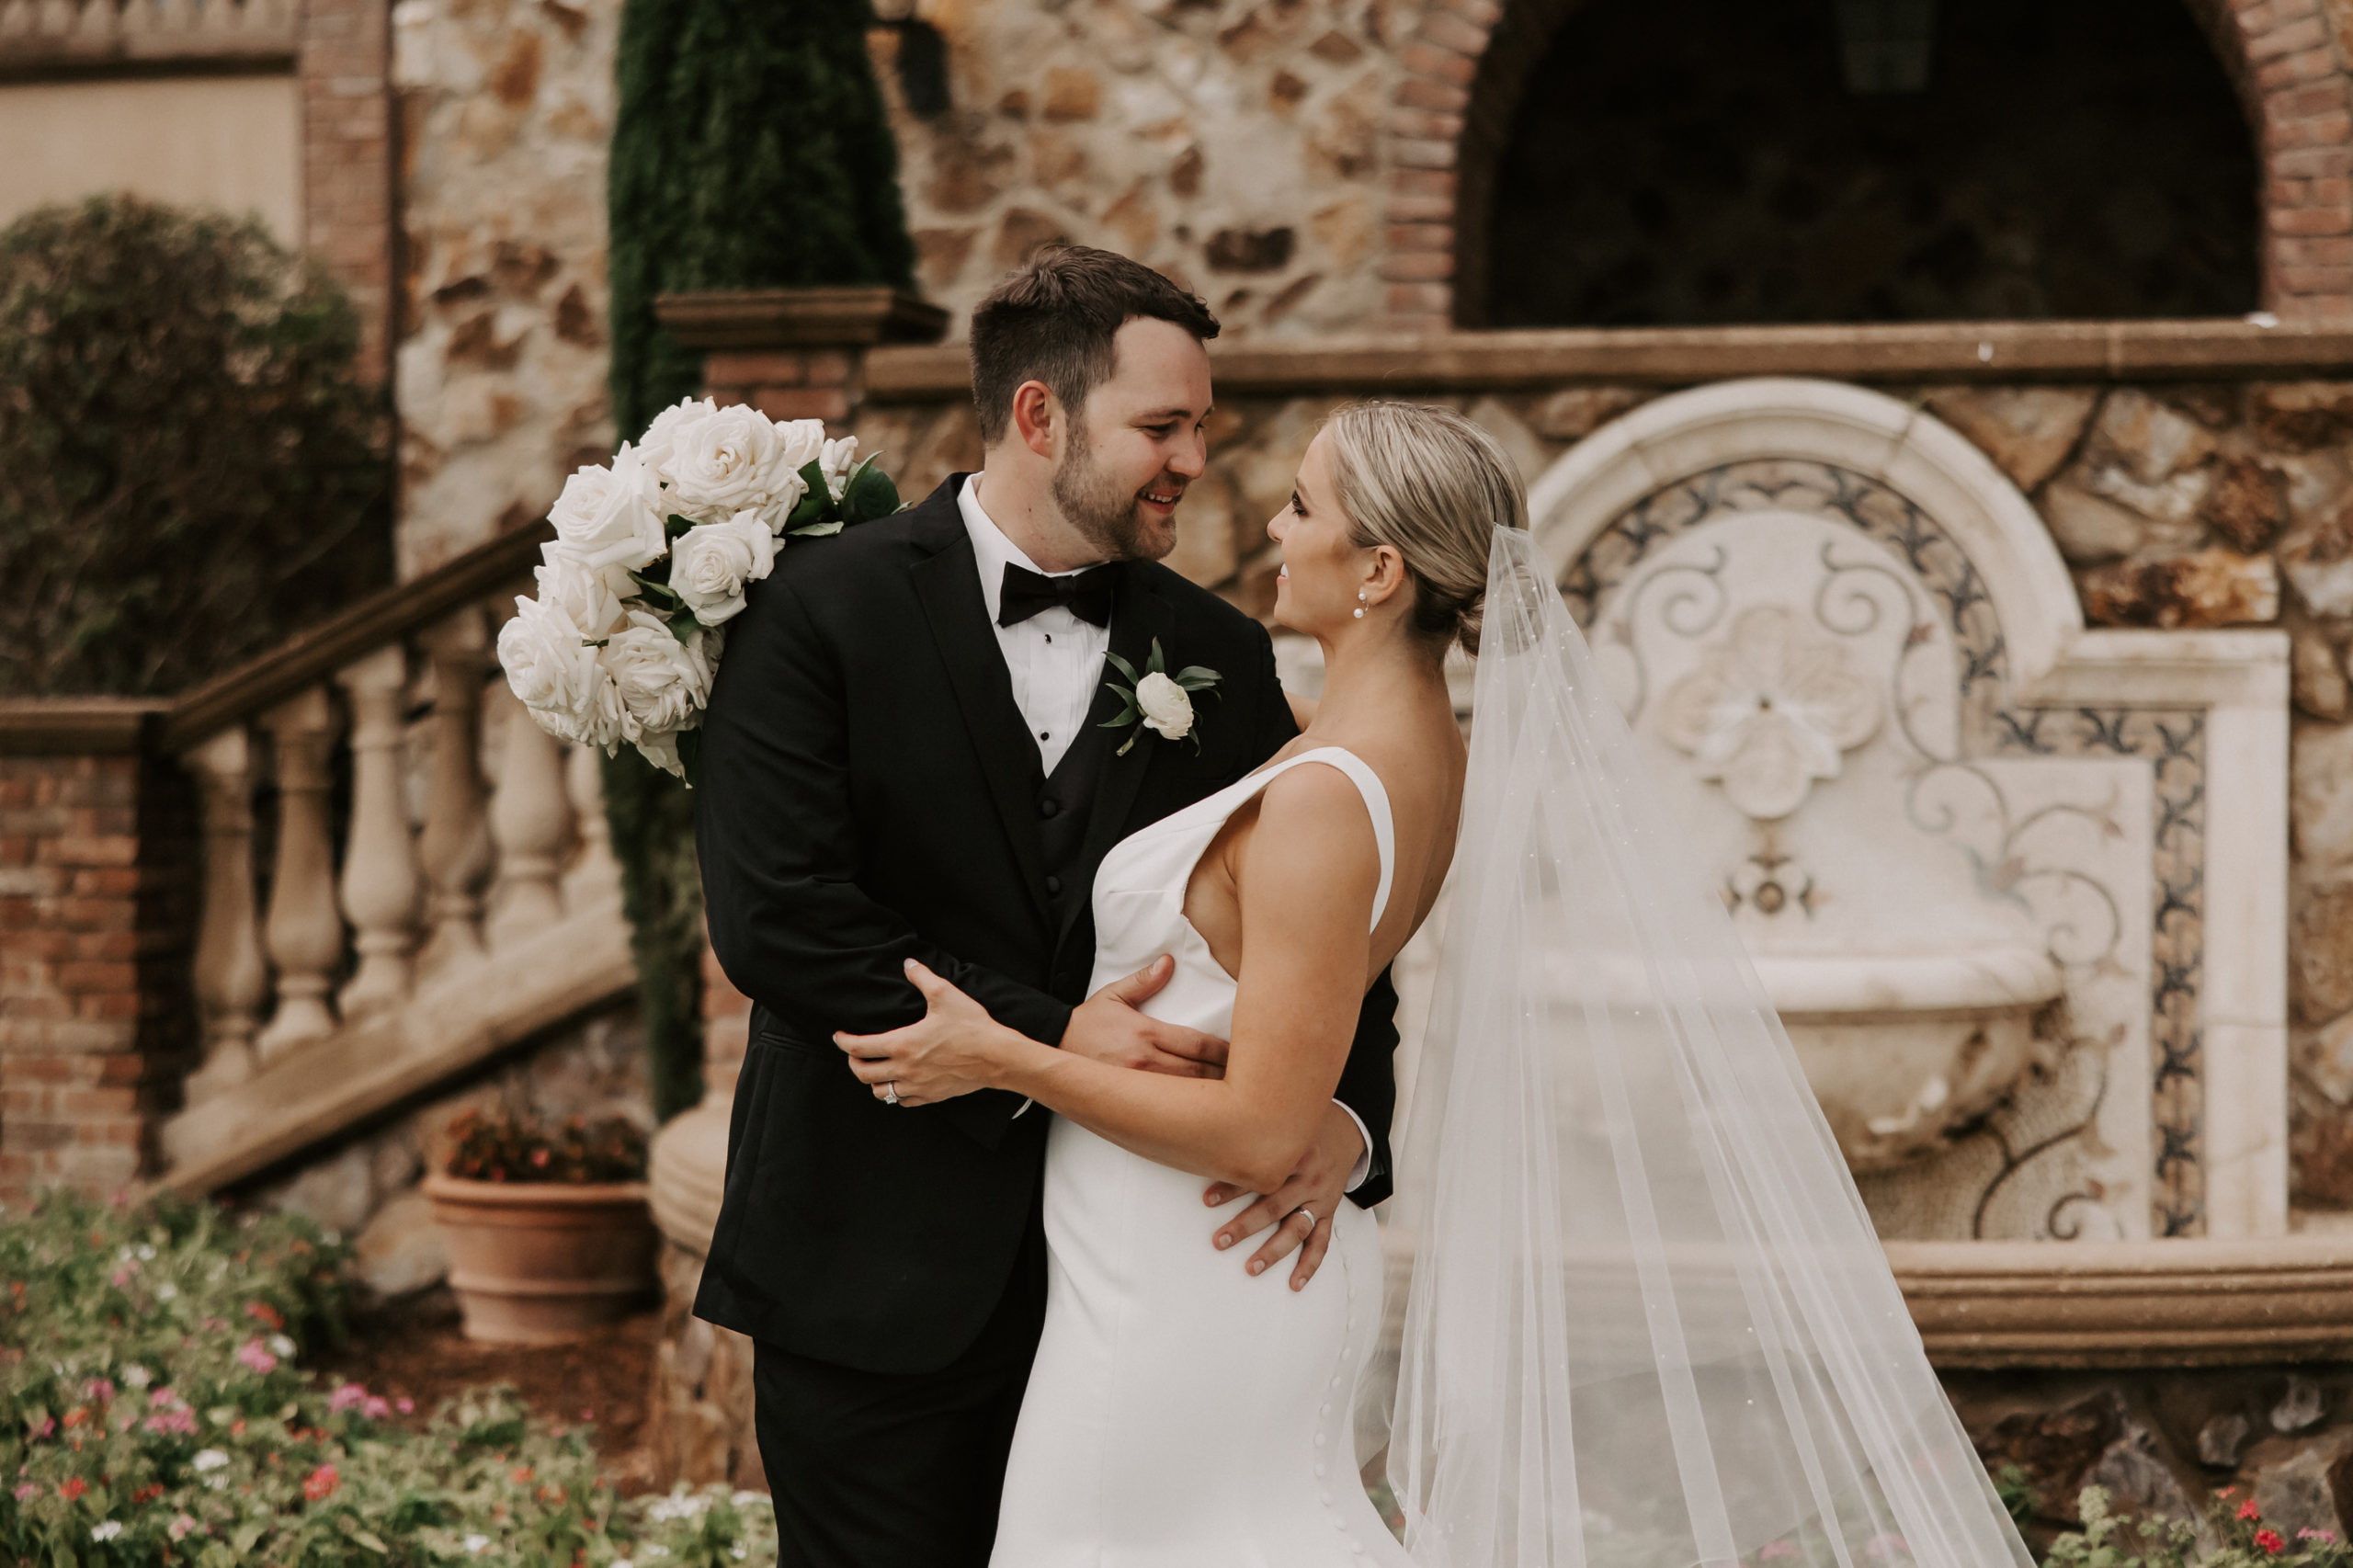 This venue offer multiple sites like the Grand Lawn, The Reflection Pond, and The Wine Cellar to take an amazing portraits before your elegant and timeless wedding. 